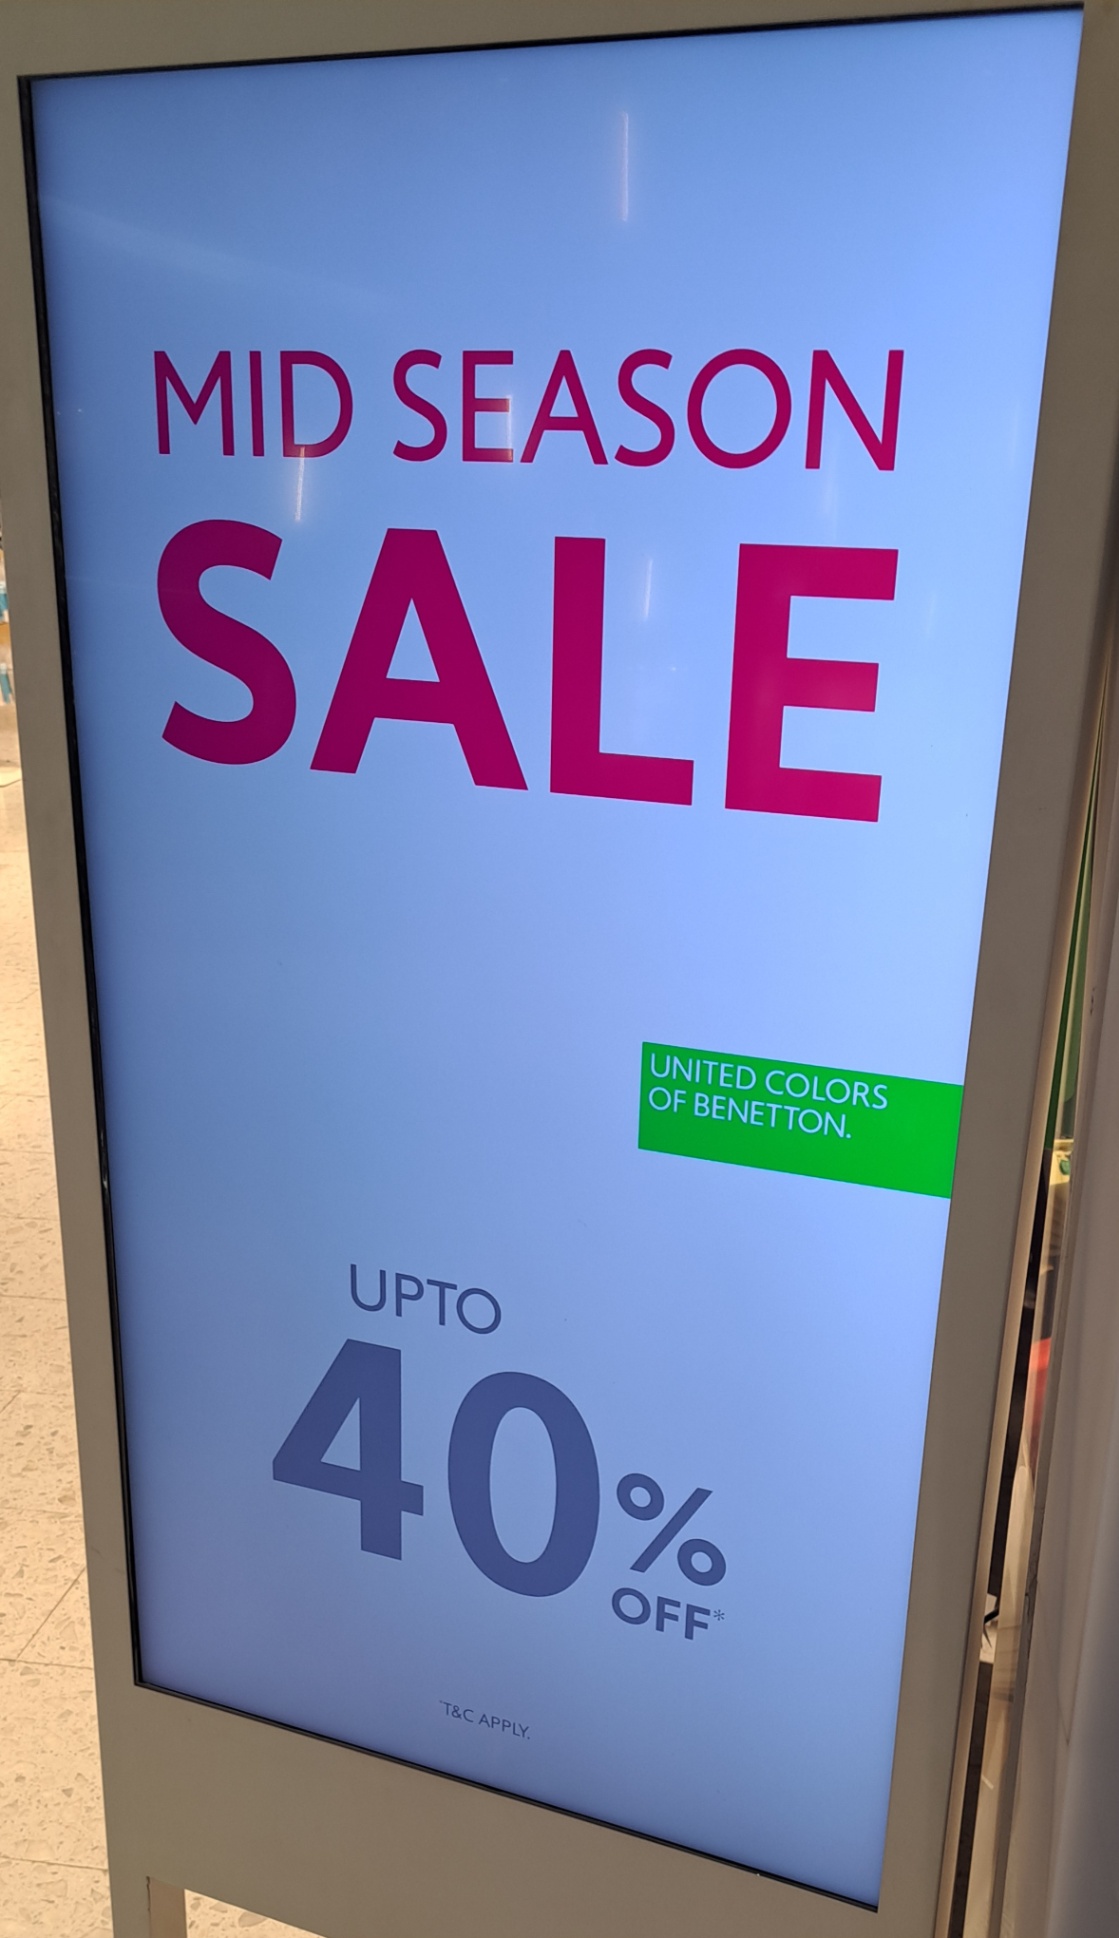 New Deal - Upto 40% off @UNITED COLORS OF BENETTON, DB CITY MALL, Bhopal